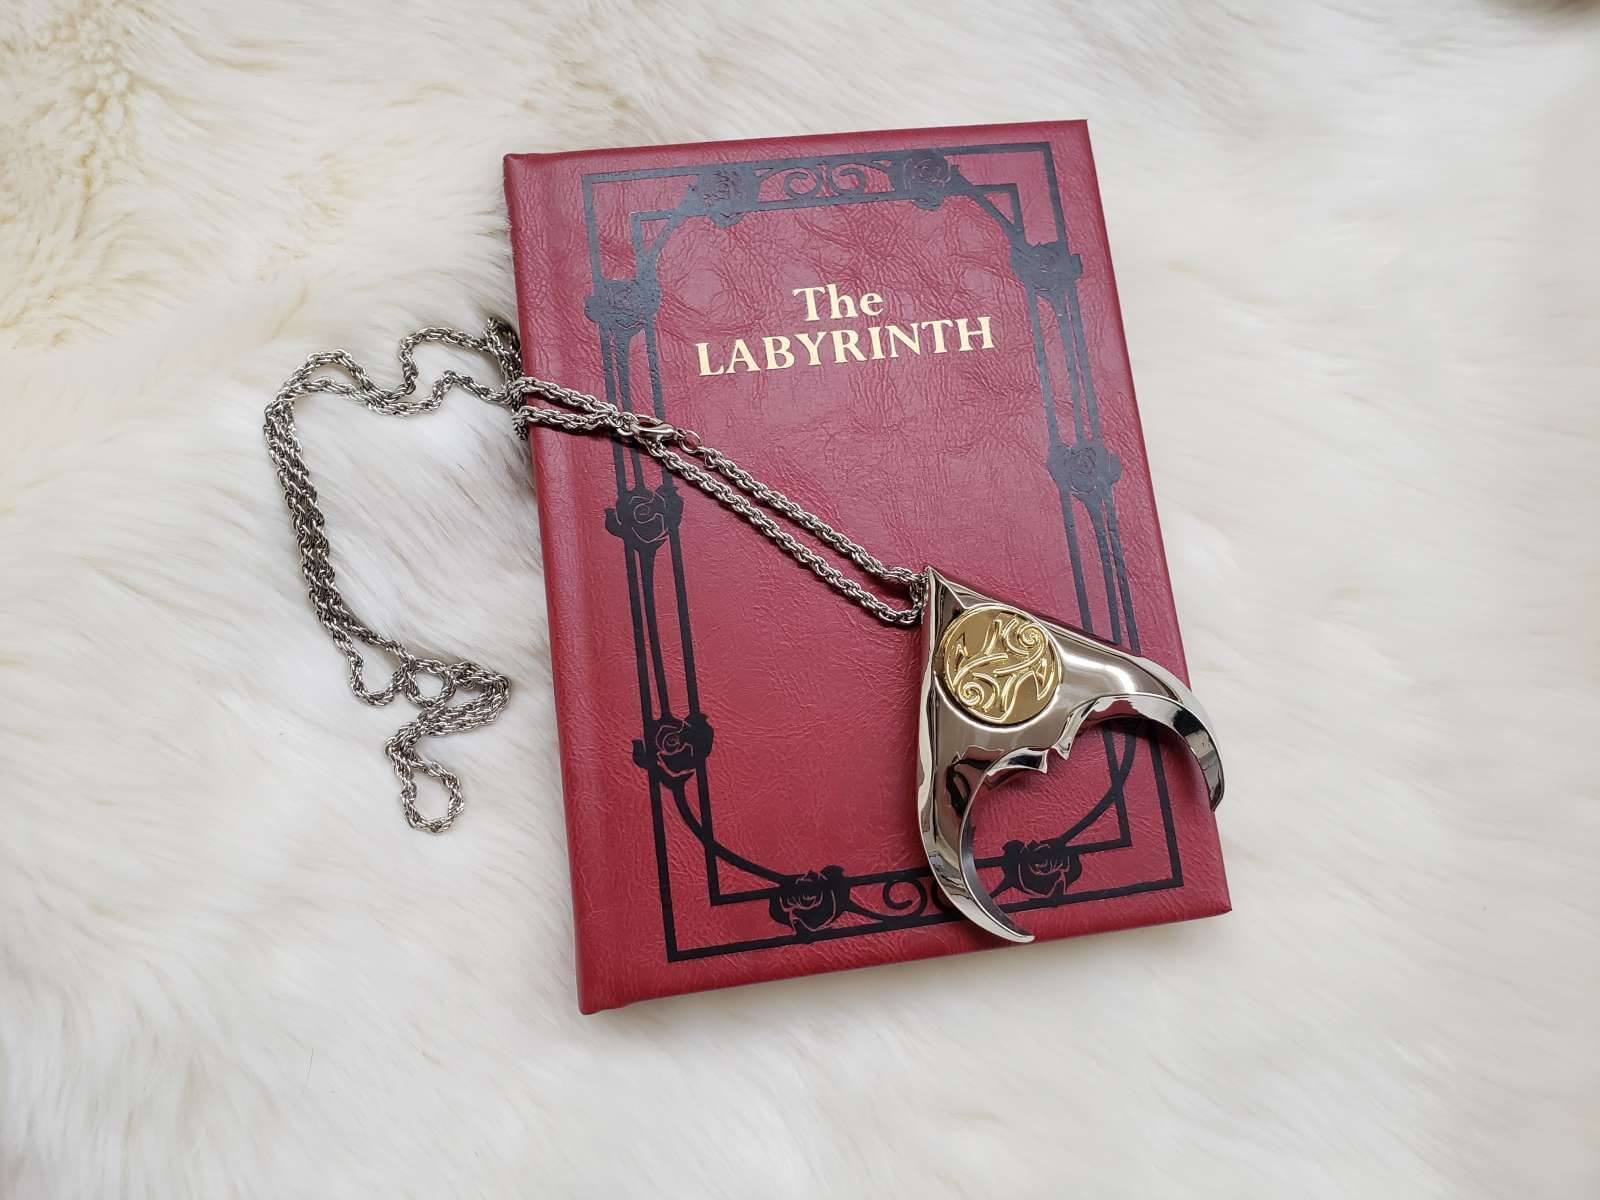 Labyrinth Movie Goblin King Jareth Dave Bowie Necklace Replica Pendant Silver Gold 3